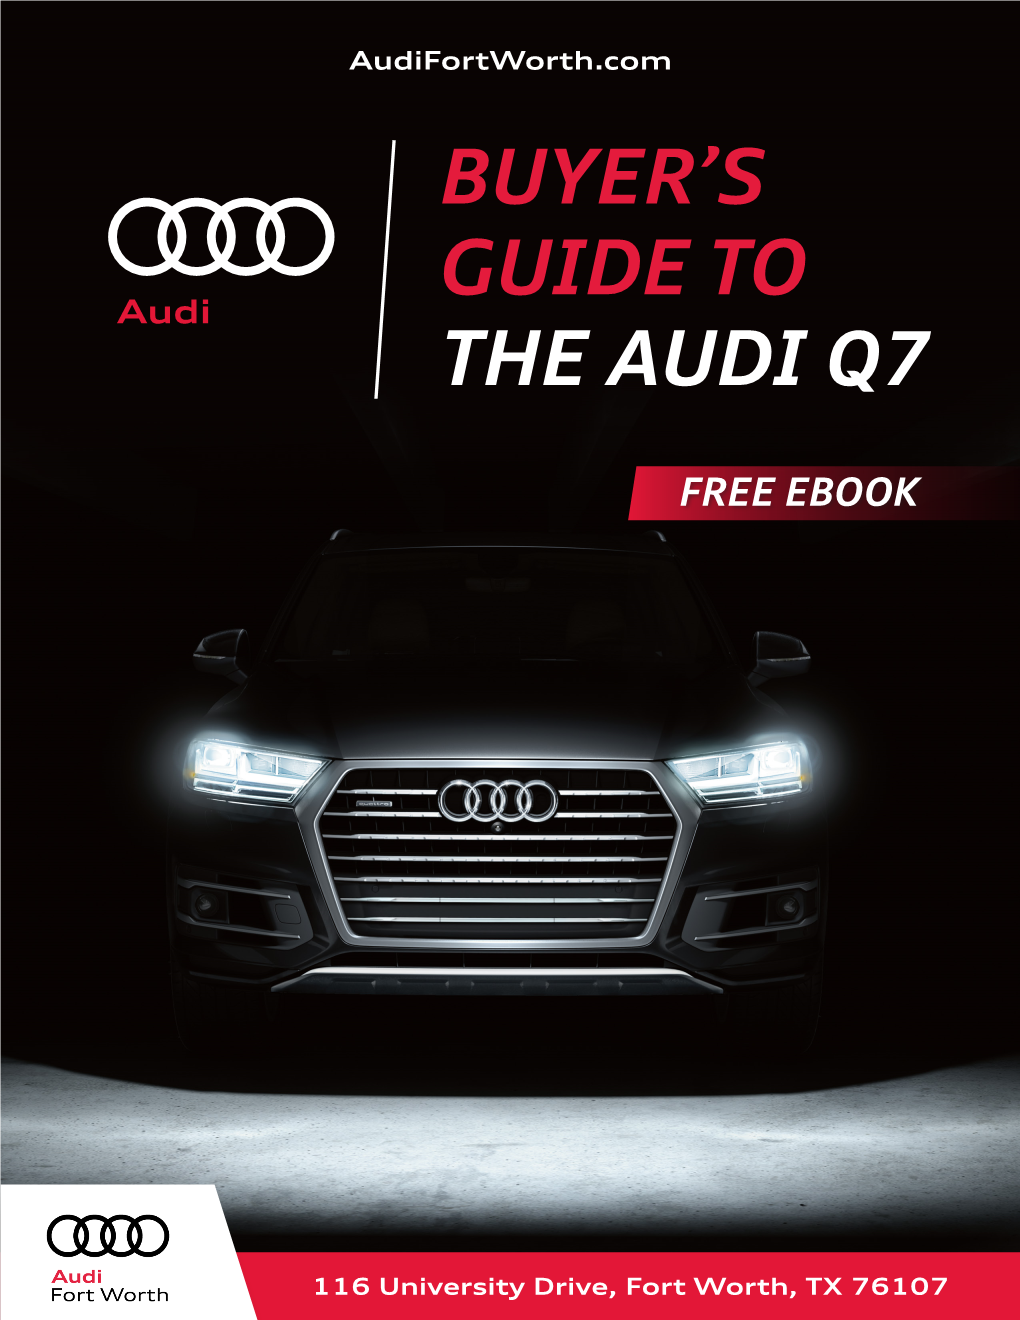 Buyer's Guide to the Audi Q7